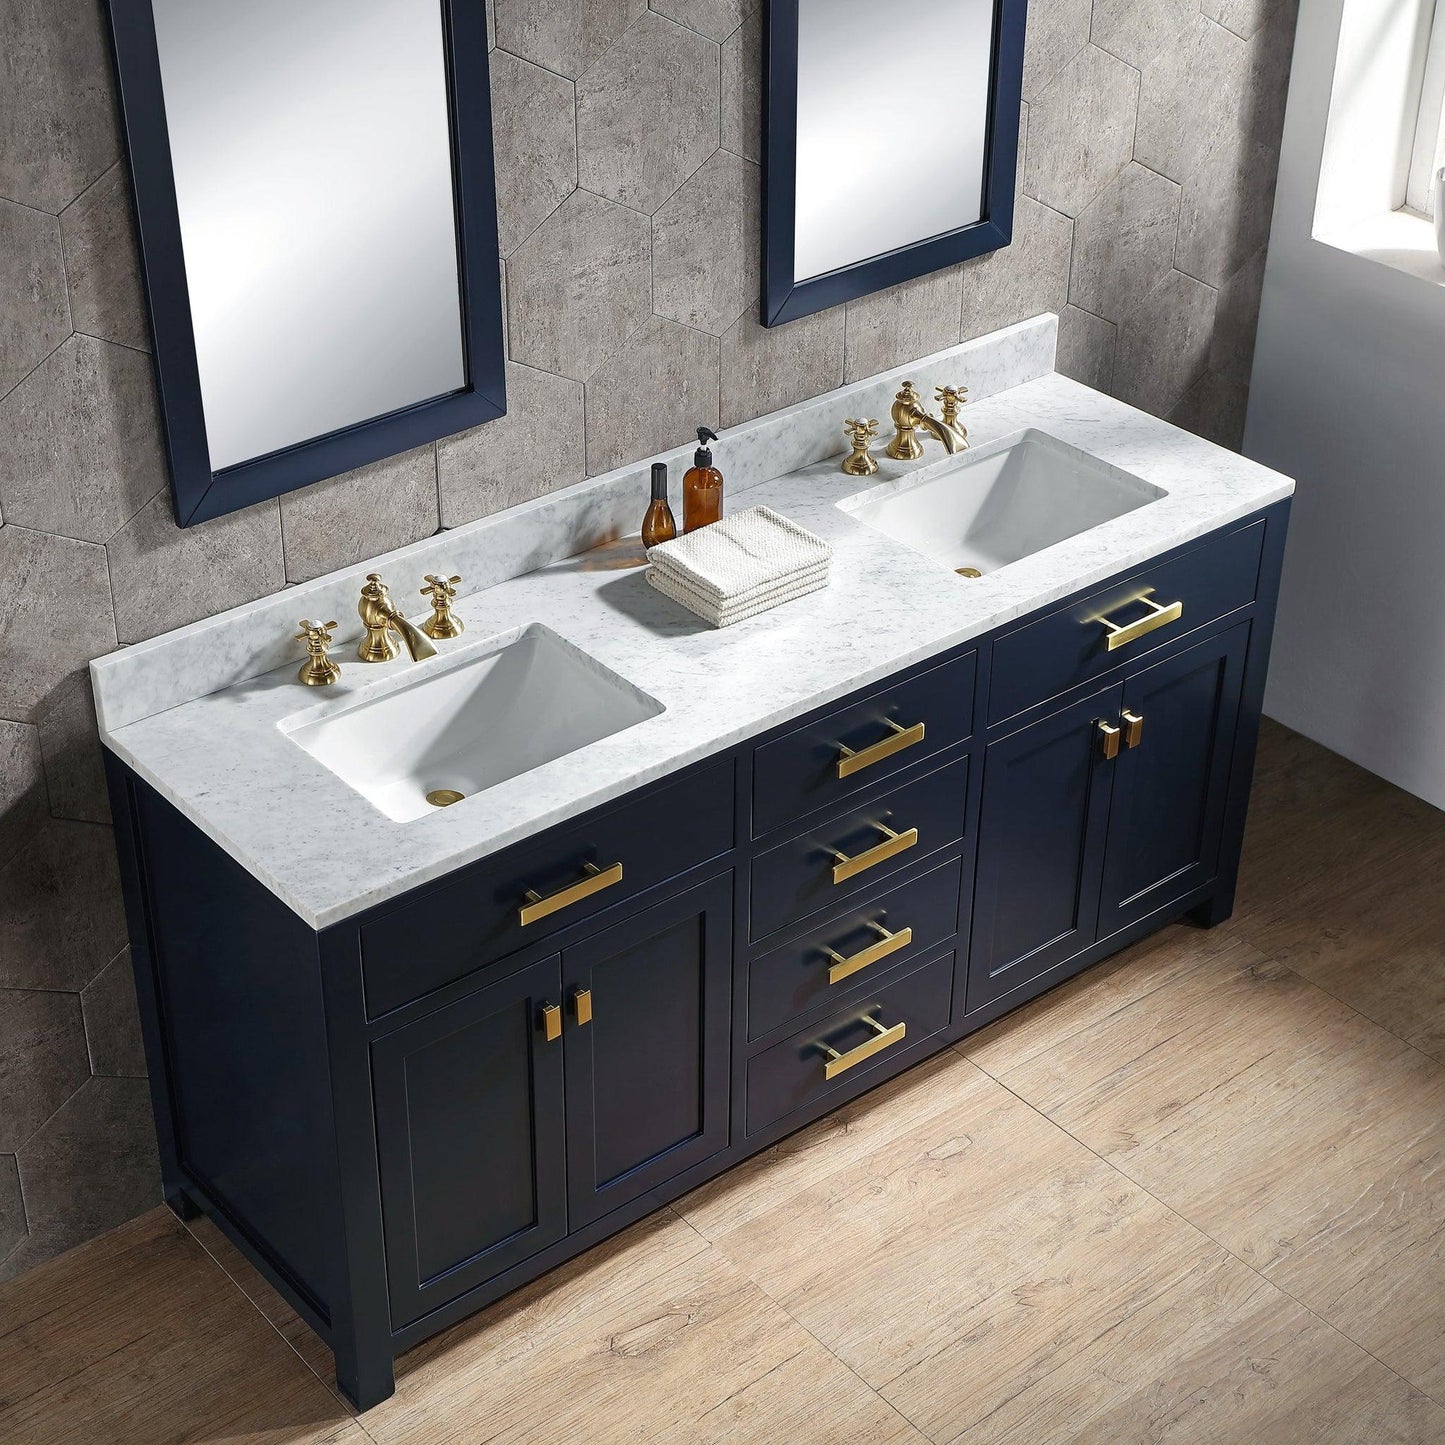 Water Creation Madison 72" Double Sink Carrara White Marble Vanity In Monarch Blue With F2-0013-06-FX Lavatory Faucet(s)